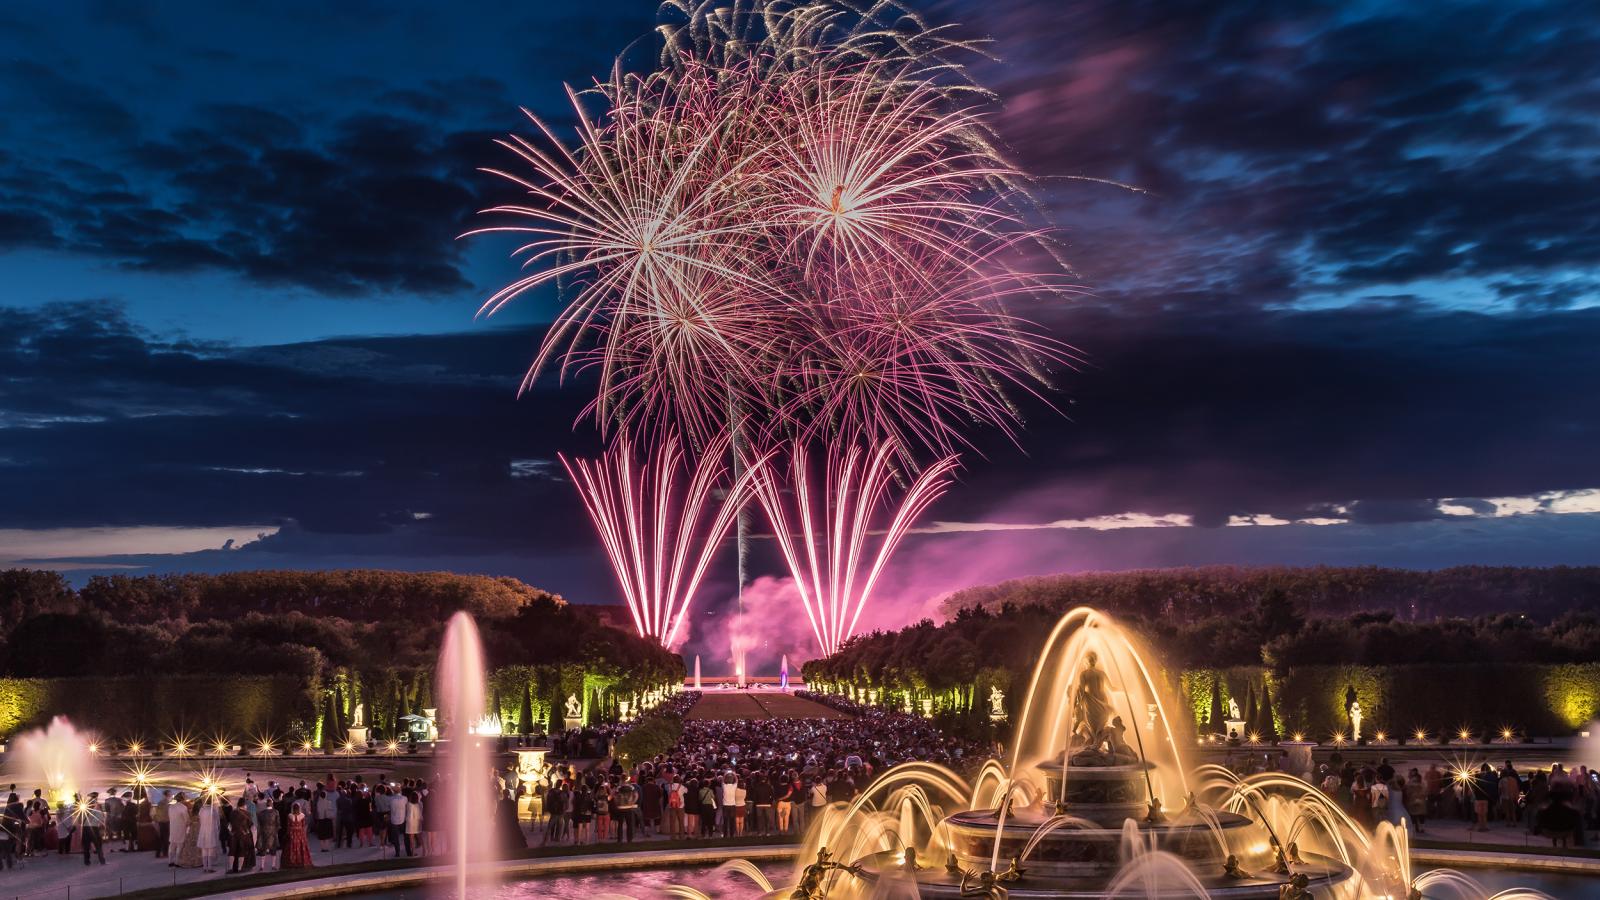 The Versailles magic of the Musical Fountains Shows